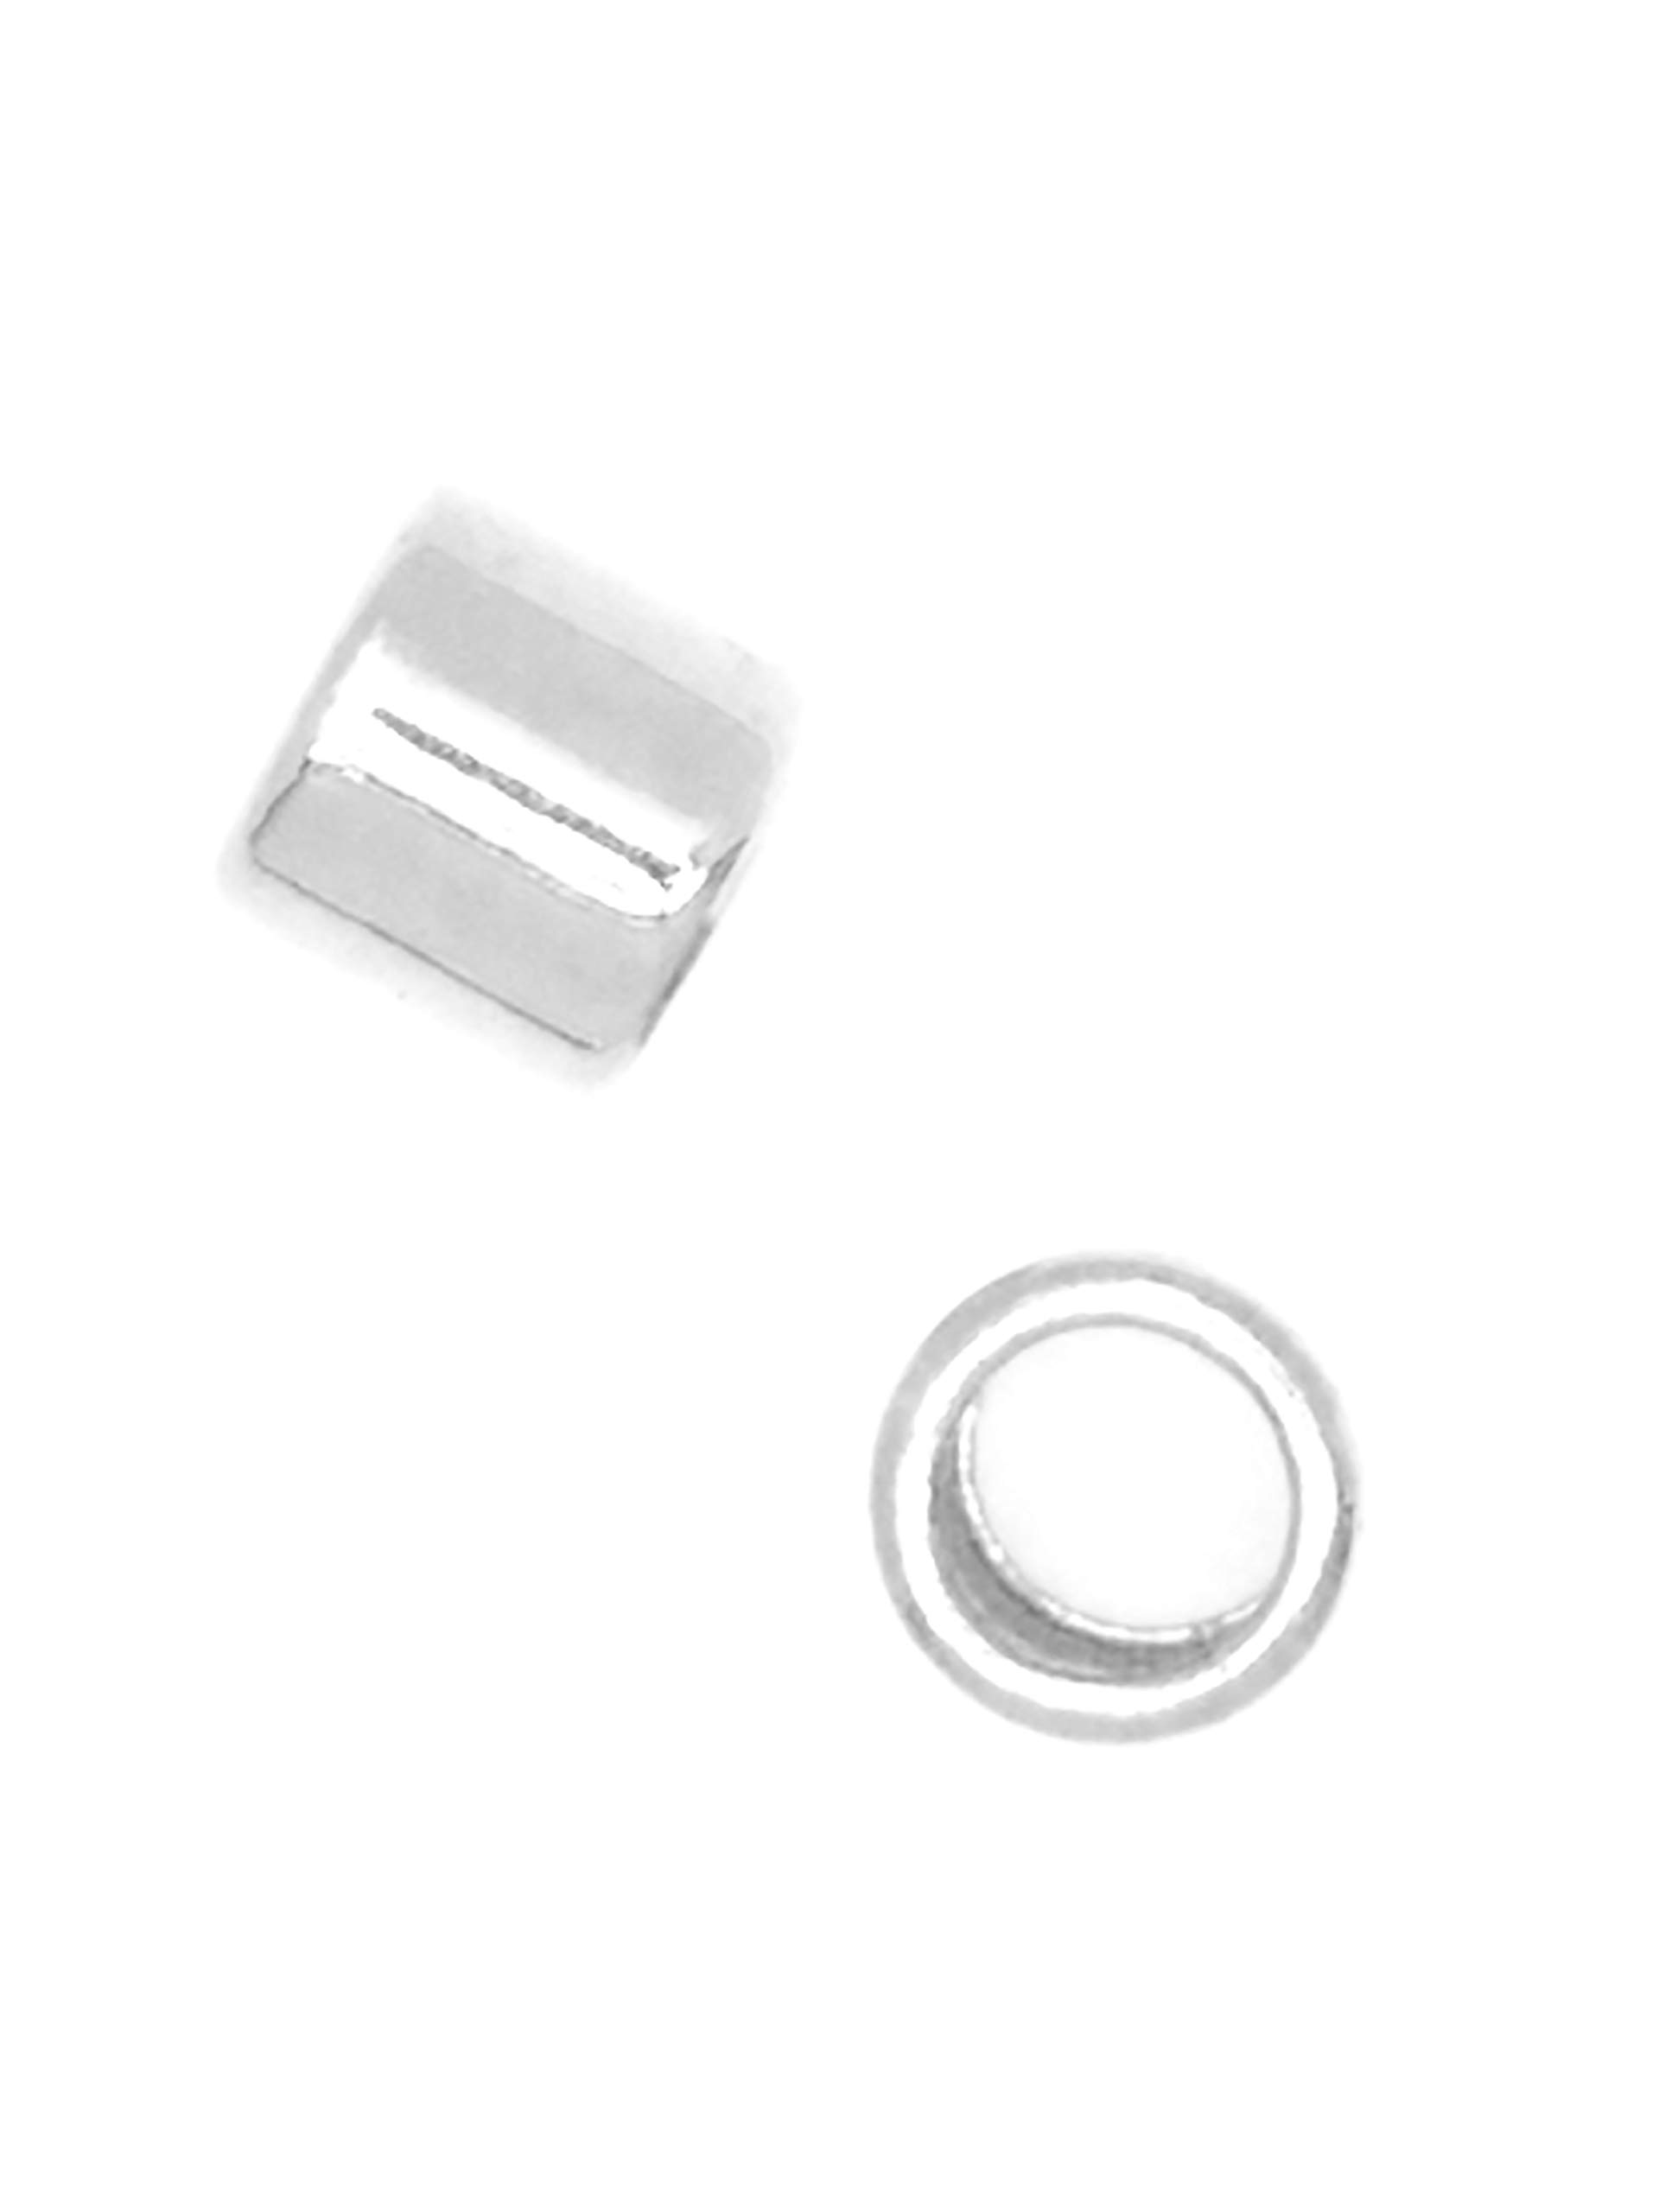 Cousin 2mm Sterling Silver Crimp Bead - 50pc